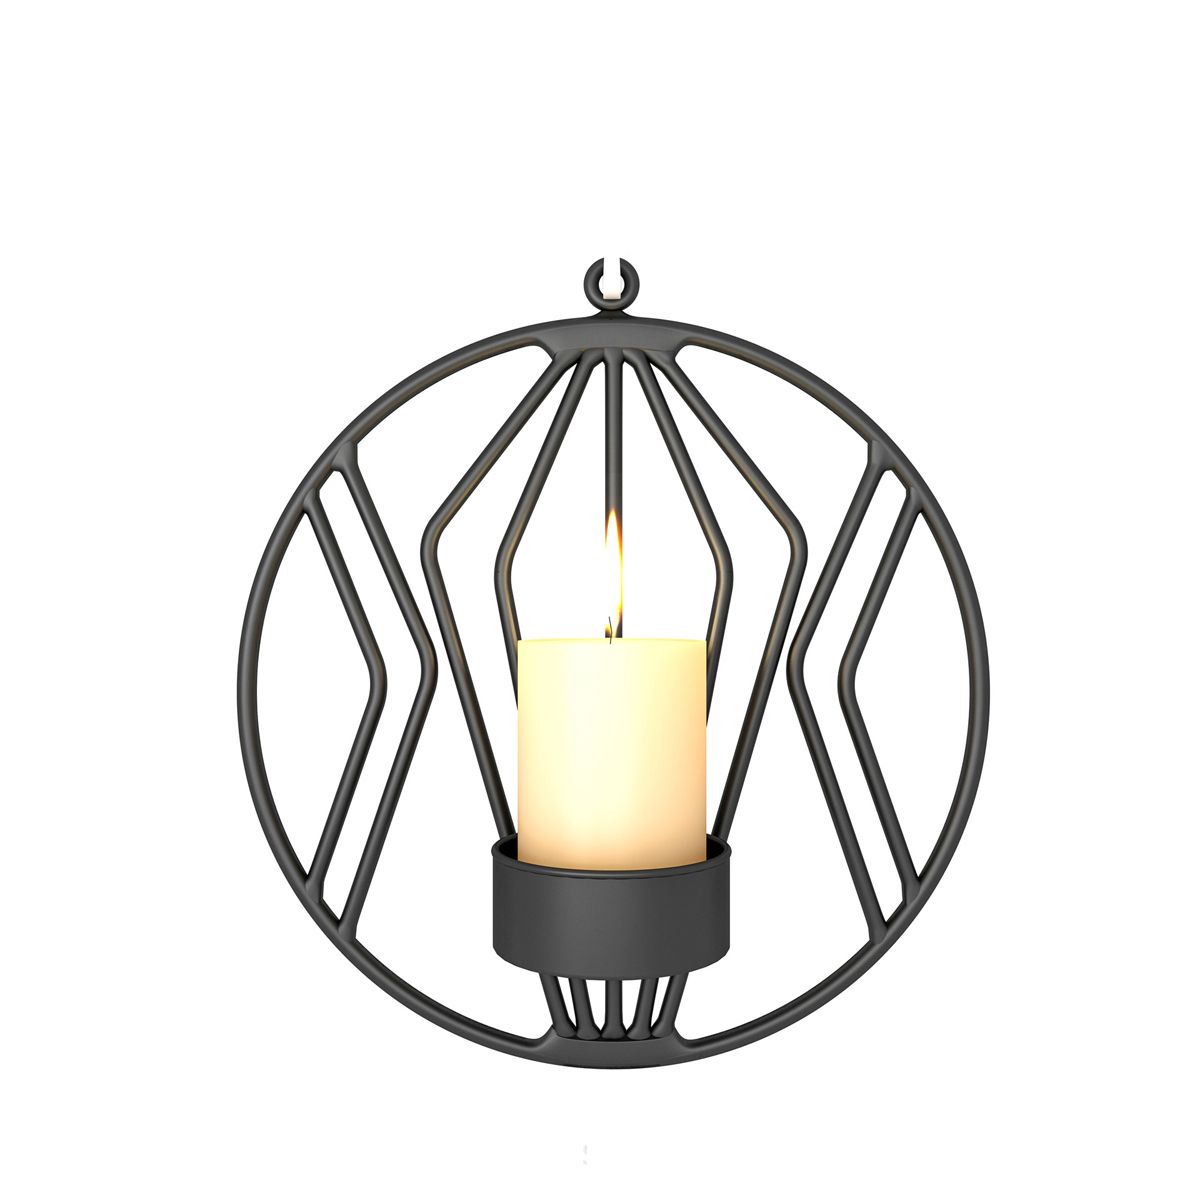 3D-Geometric-Candlestick-Iron-Wall-Candle-Holder-Sconce-Warm-Home-Party-Decor-1727945